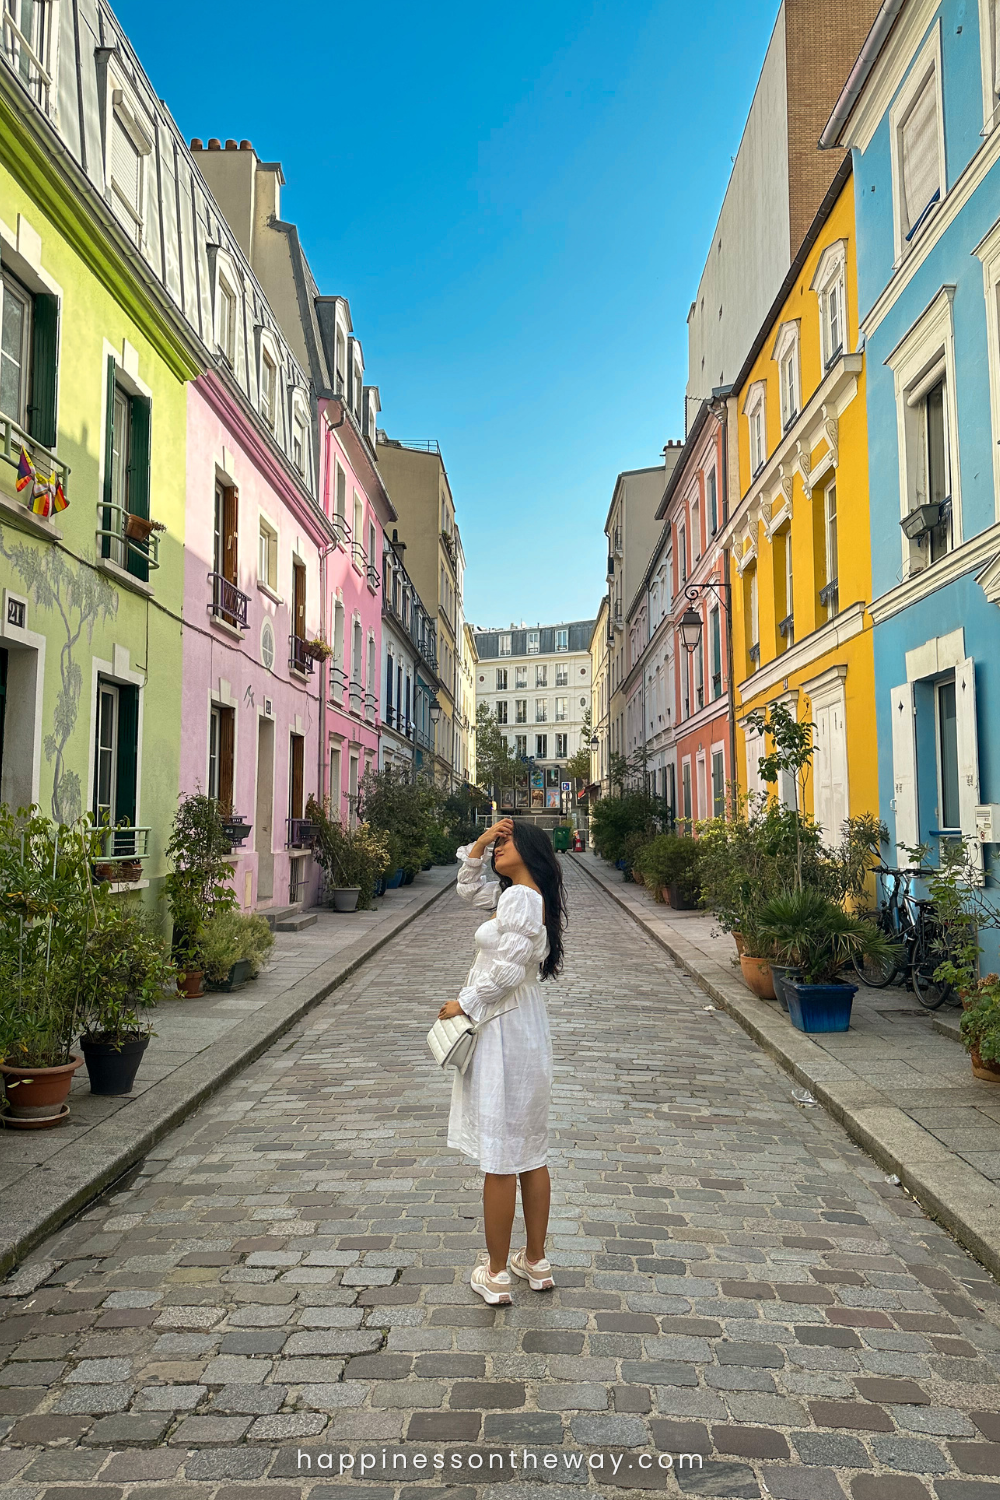 Me in a white dress stands on a cobbled street, her hand gracefully touching her hat, with the colorful facades of Rue Crémieux in the background.